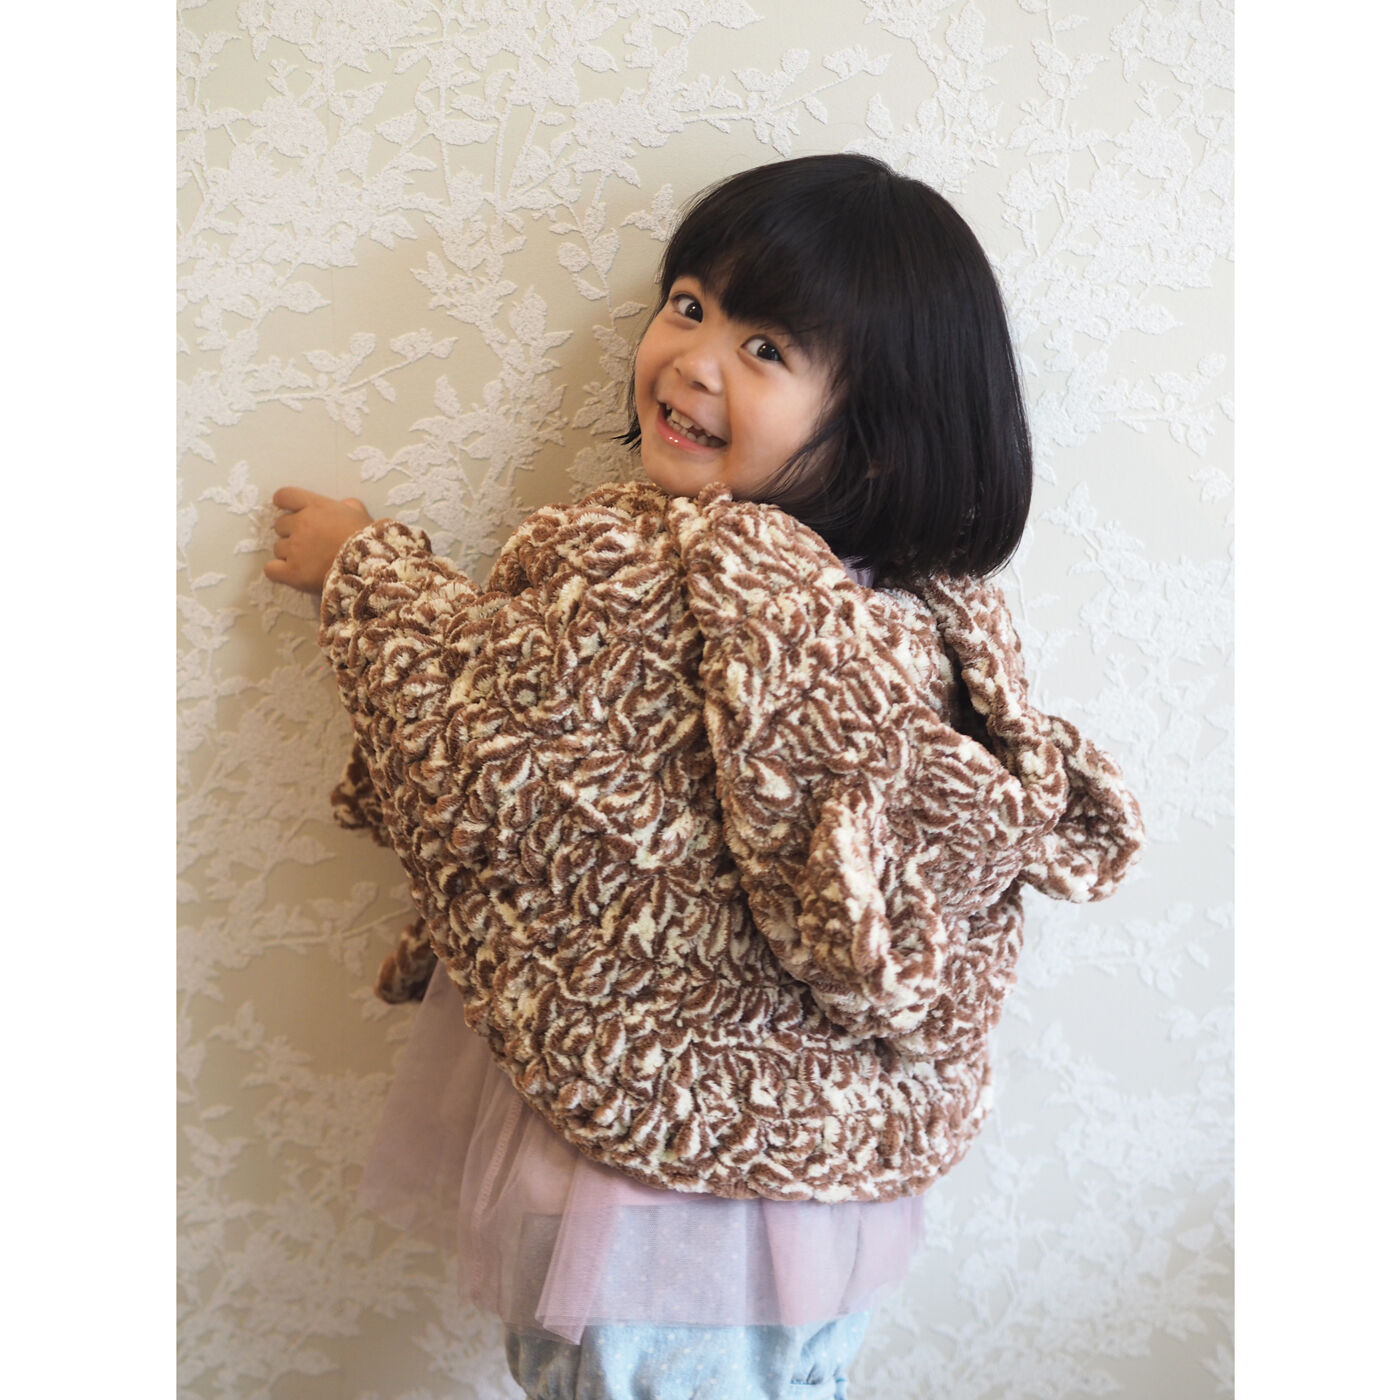 Couturier special|Super Happy Chenille（スーパーハッピーシェニール）で編む　かぎ針編み　アニマルケープ